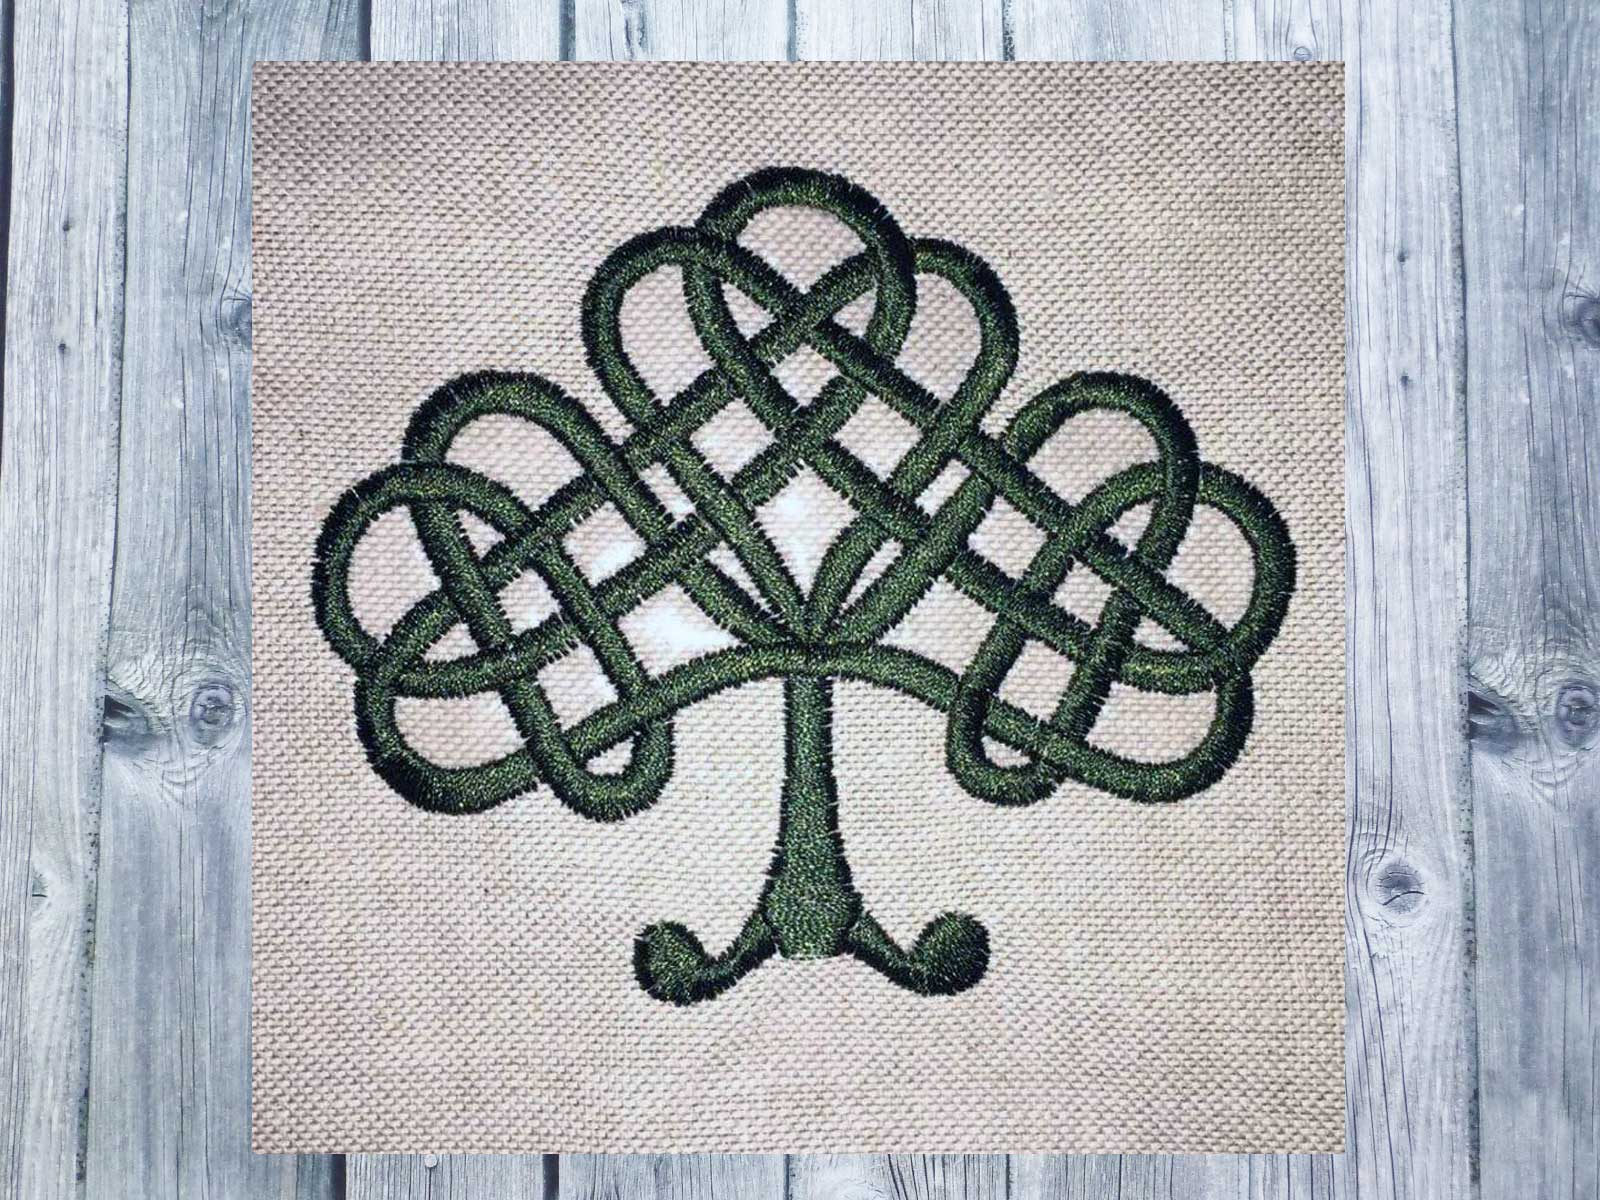 Celtic Embroidery Pattern Embroidery Pattern Celtic Knots Embroidered Tree 10x10 Frame Satin Engraving Medieval Clothing Celtic Art Sewing Projects